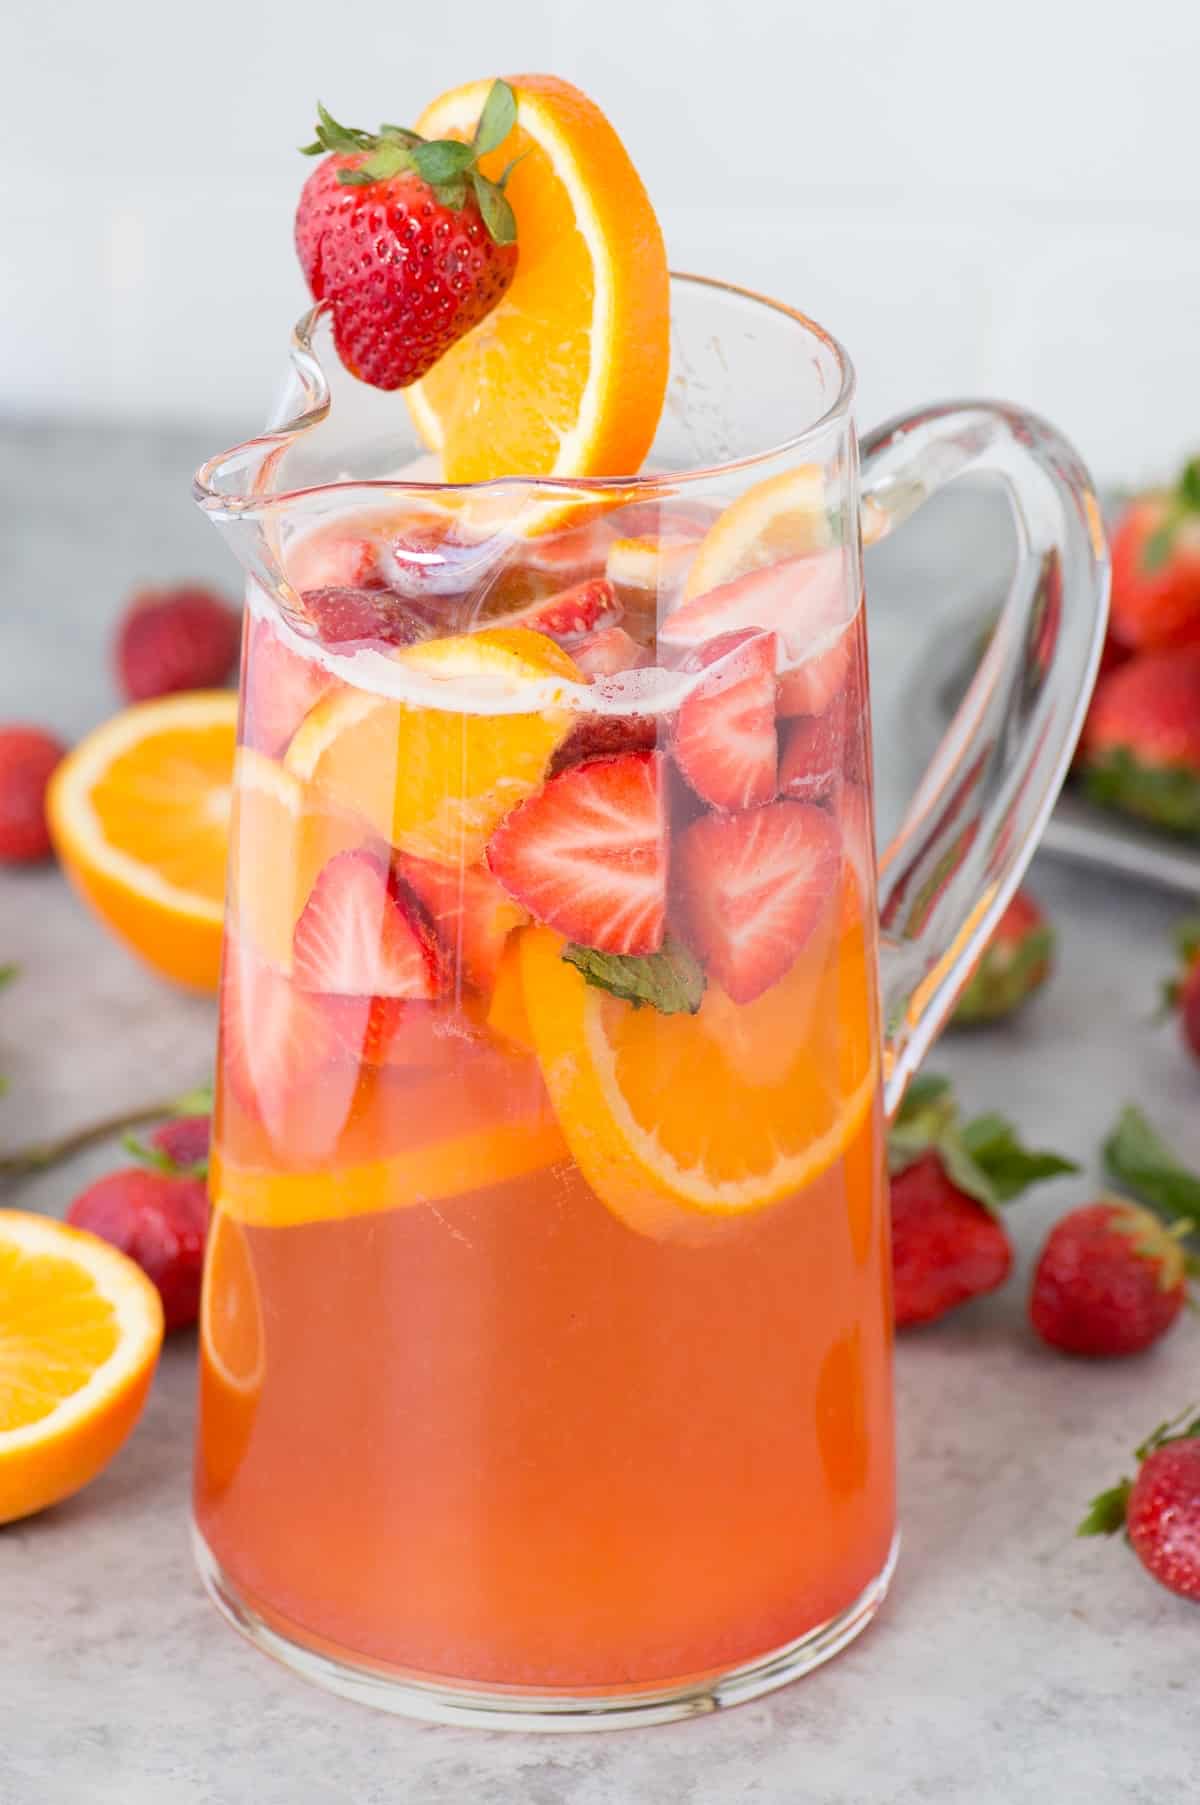 strawberry sangria in glass pitcher with strawberries, oranges and mint as garnish